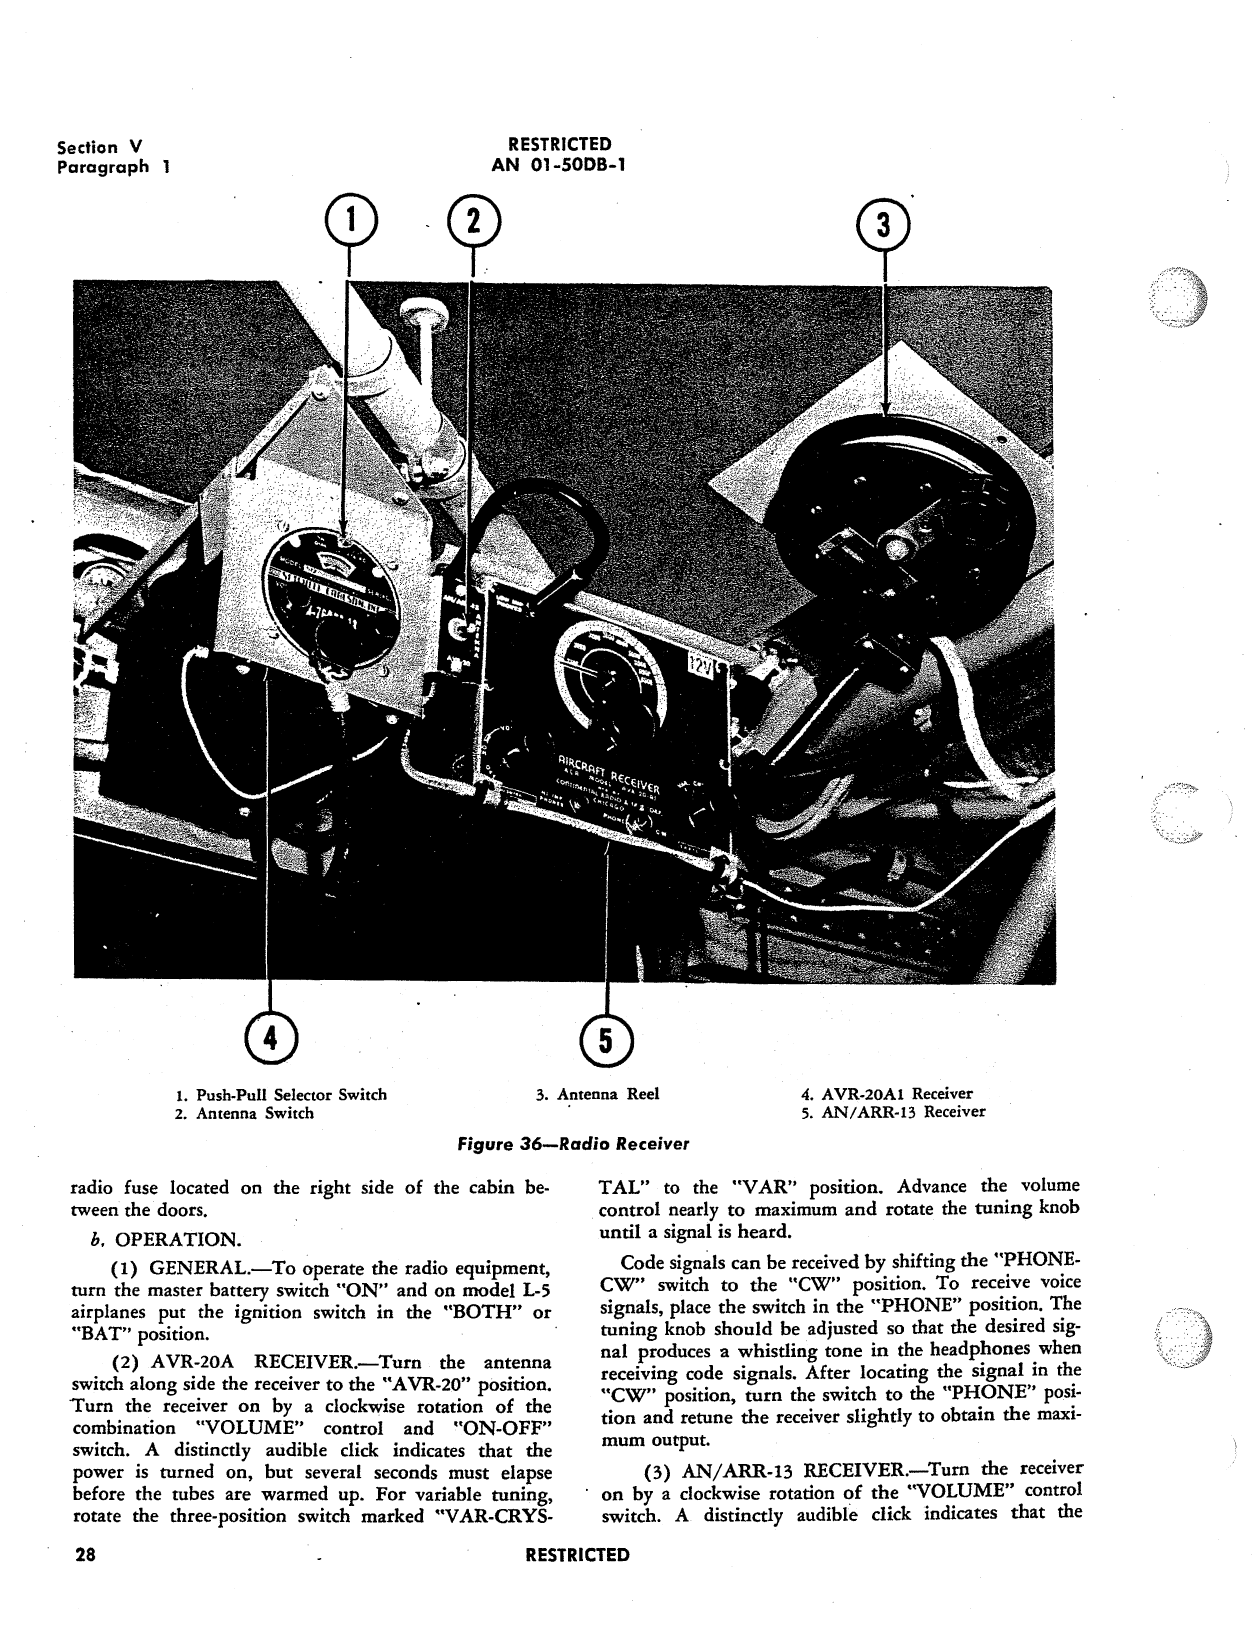 Sample page 31 from AirCorps Library document: Pilot's Flight Operating Instructions - L-5 OY-1